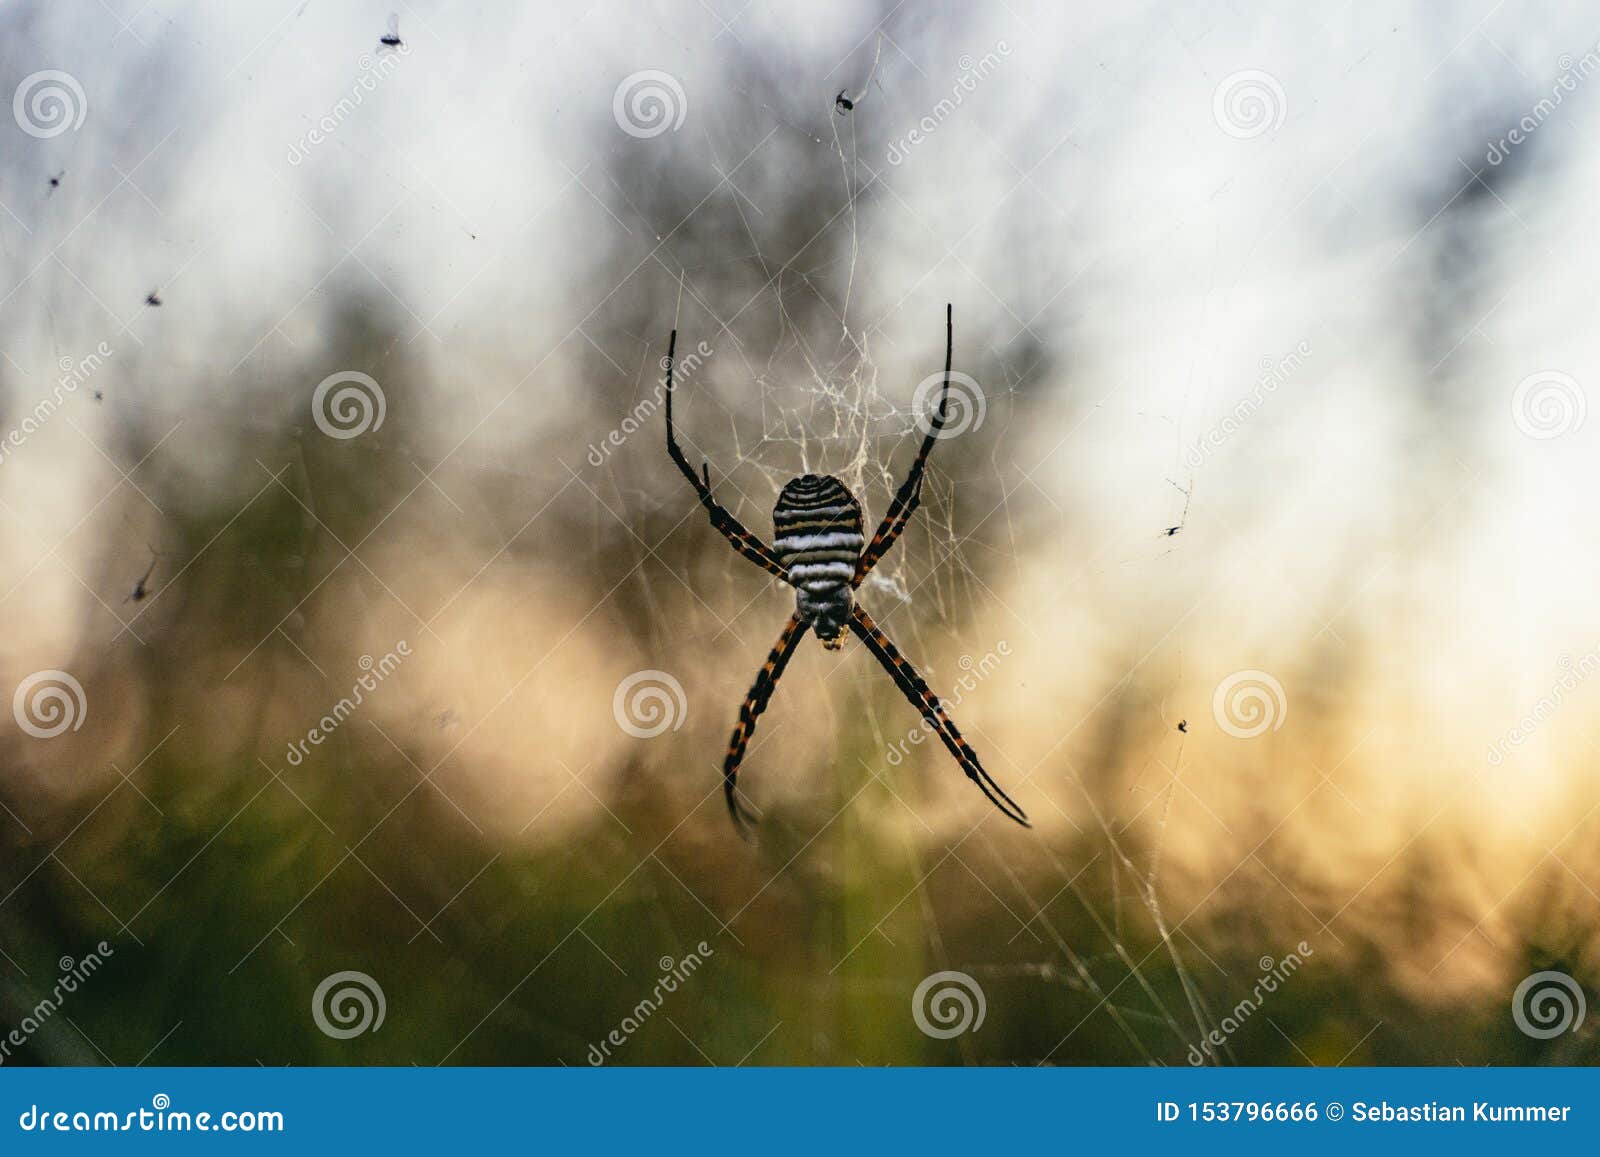 Argiope Trifasciata Or Banded Orb Weaving Spider Stock Photo